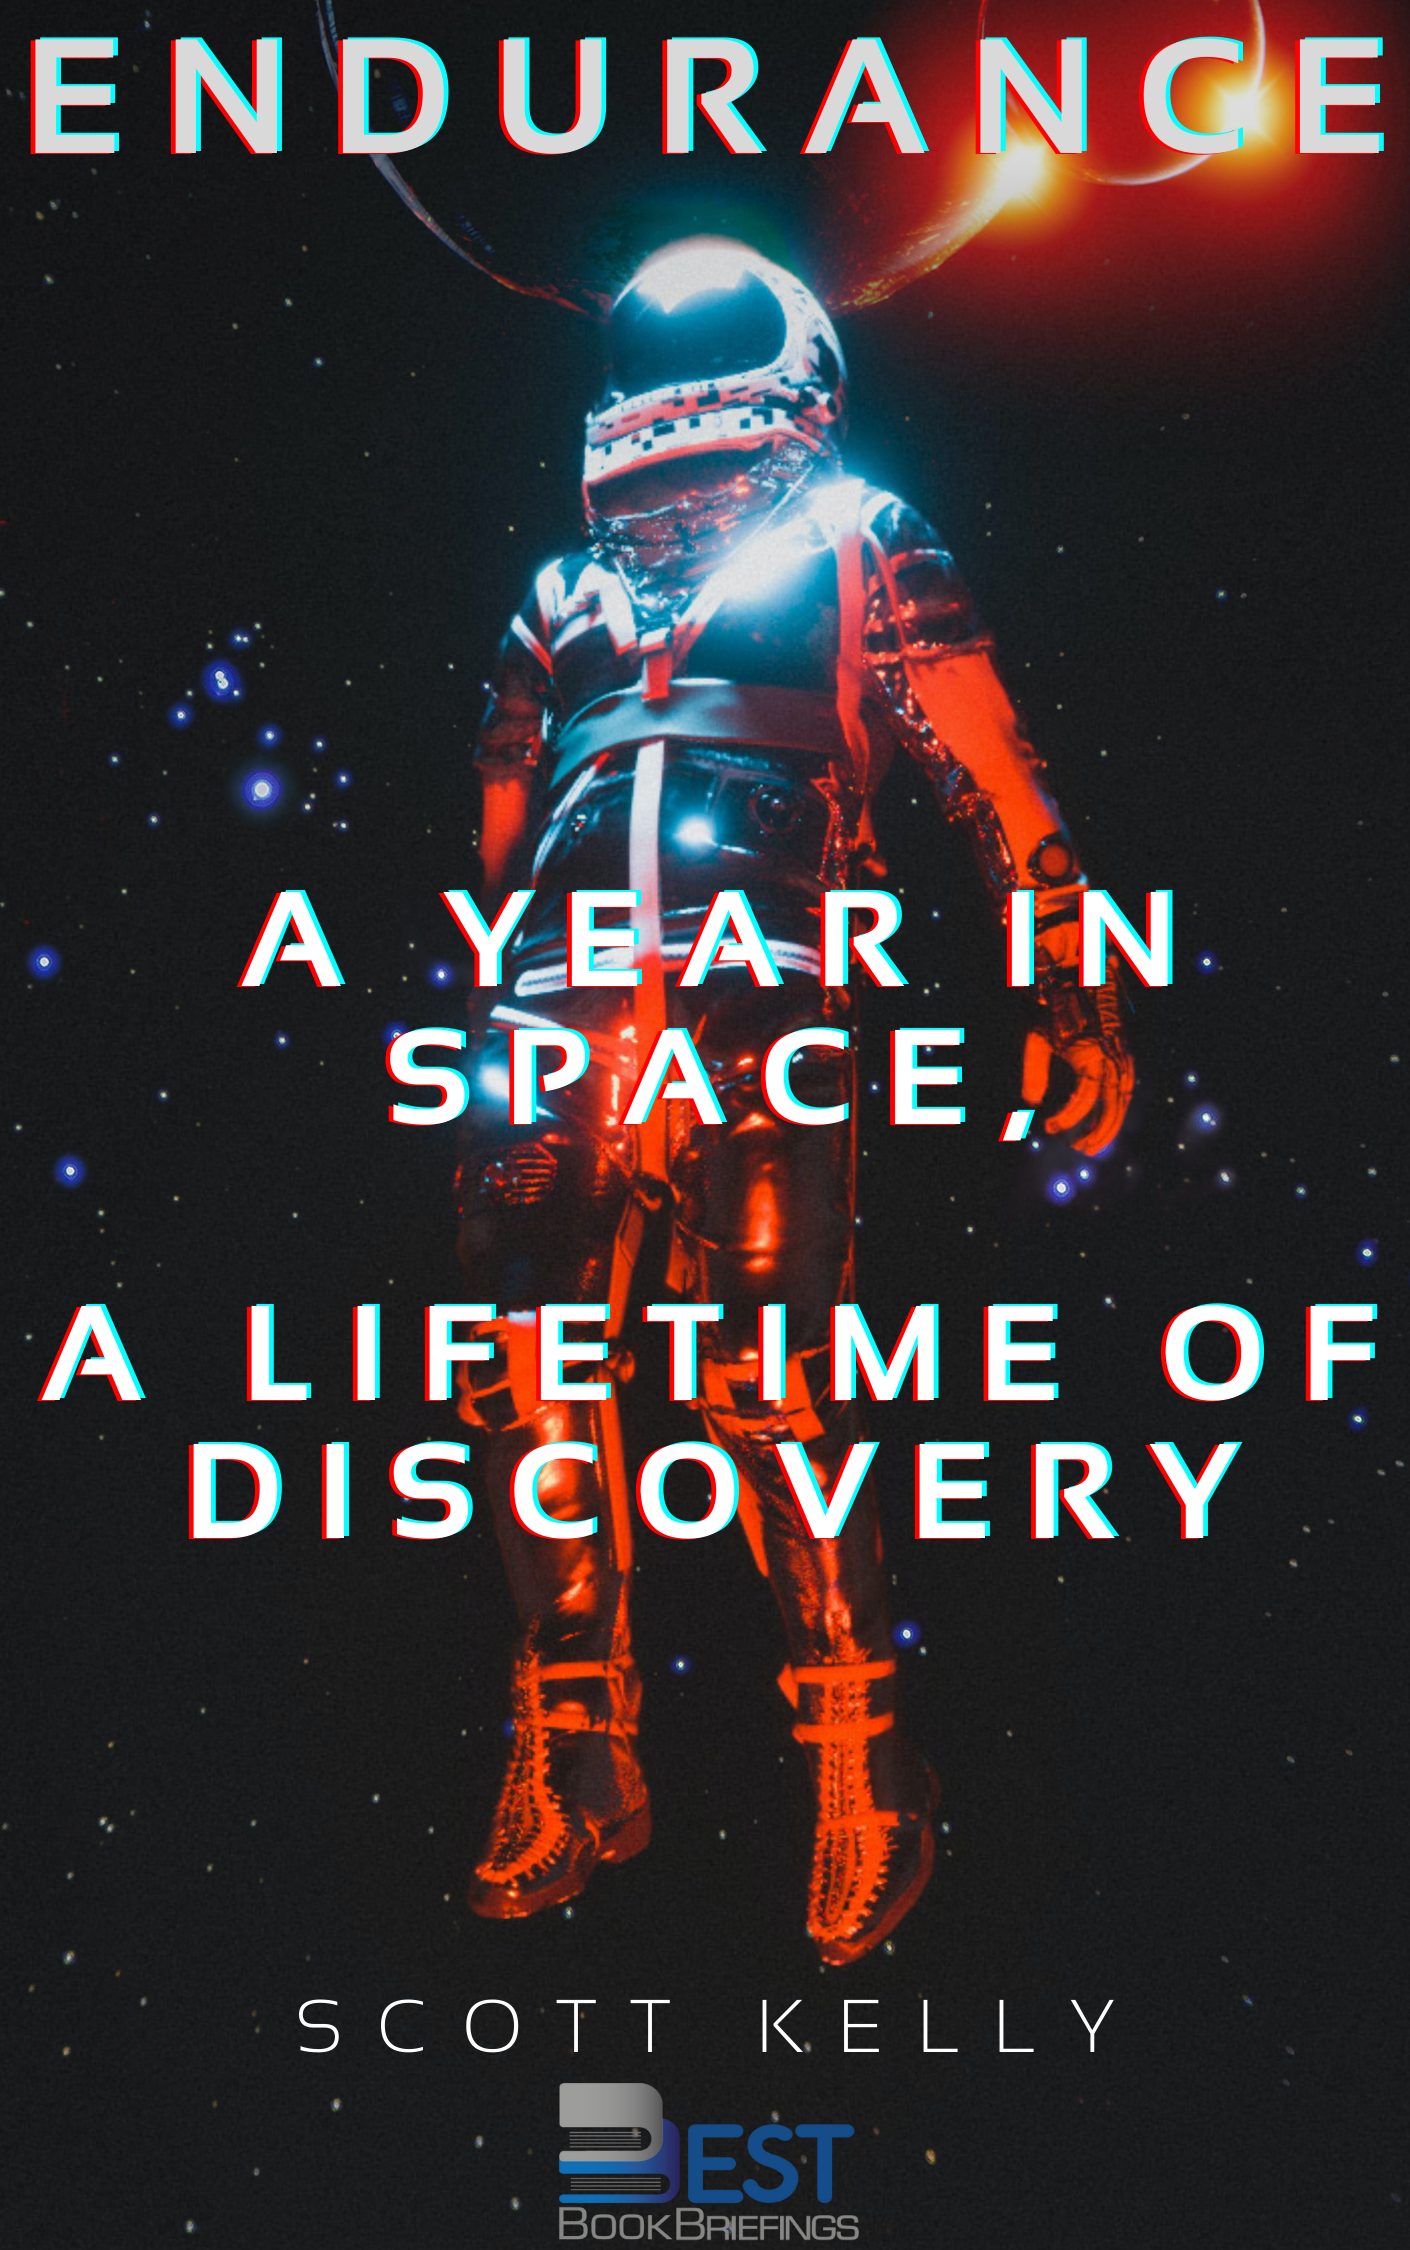 A stunning, personal memoir from the astronaut and modern-day hero who spent a record-breaking year aboard the International Space Station—a message of hope for the future that will inspire for generations to come.  In Endurance, we see the triumph of the human imagination, the strength of the human will, and the 